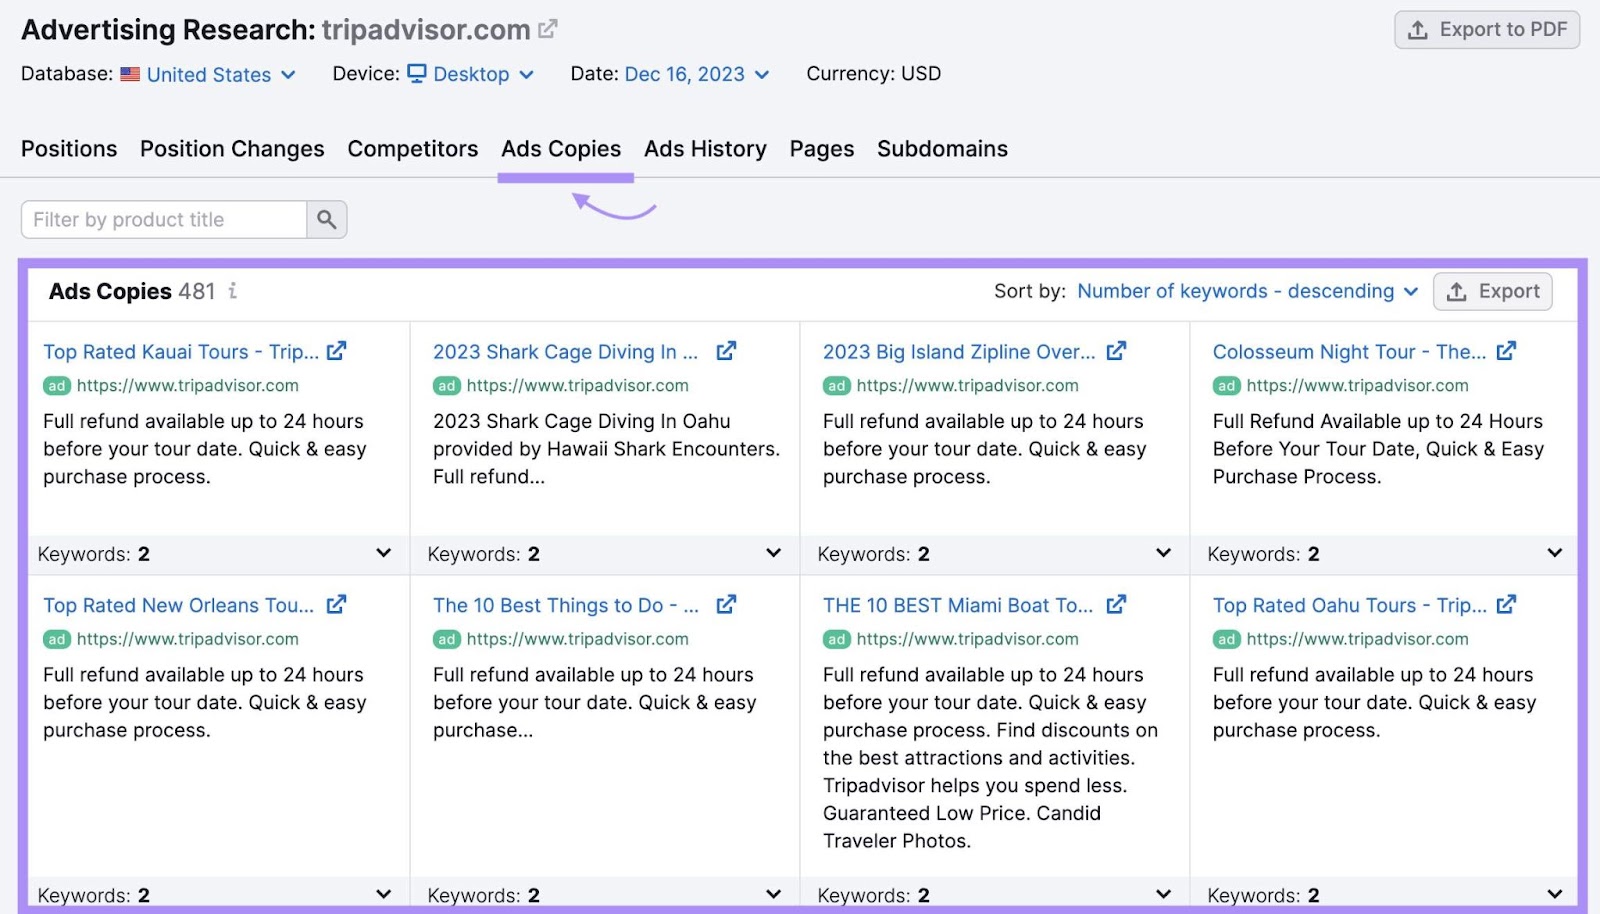 "Ads Copies" dashboard for "tripadvisor.com" in Advertising Research tool